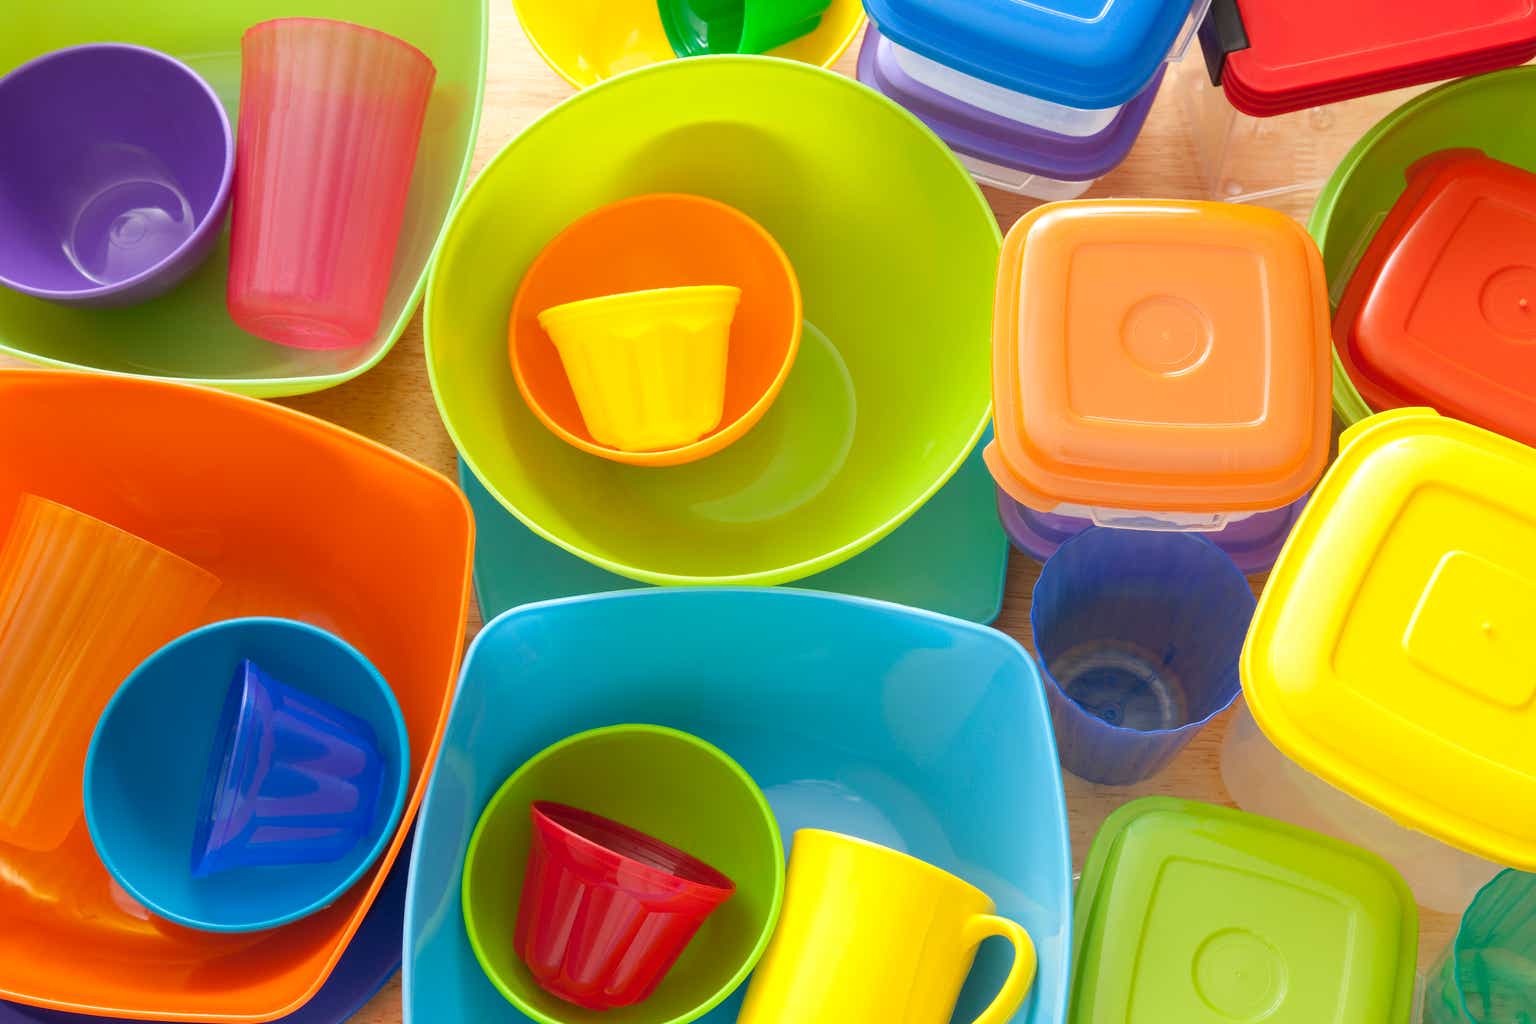 Tupperware could go out of business, but many are still relying on it